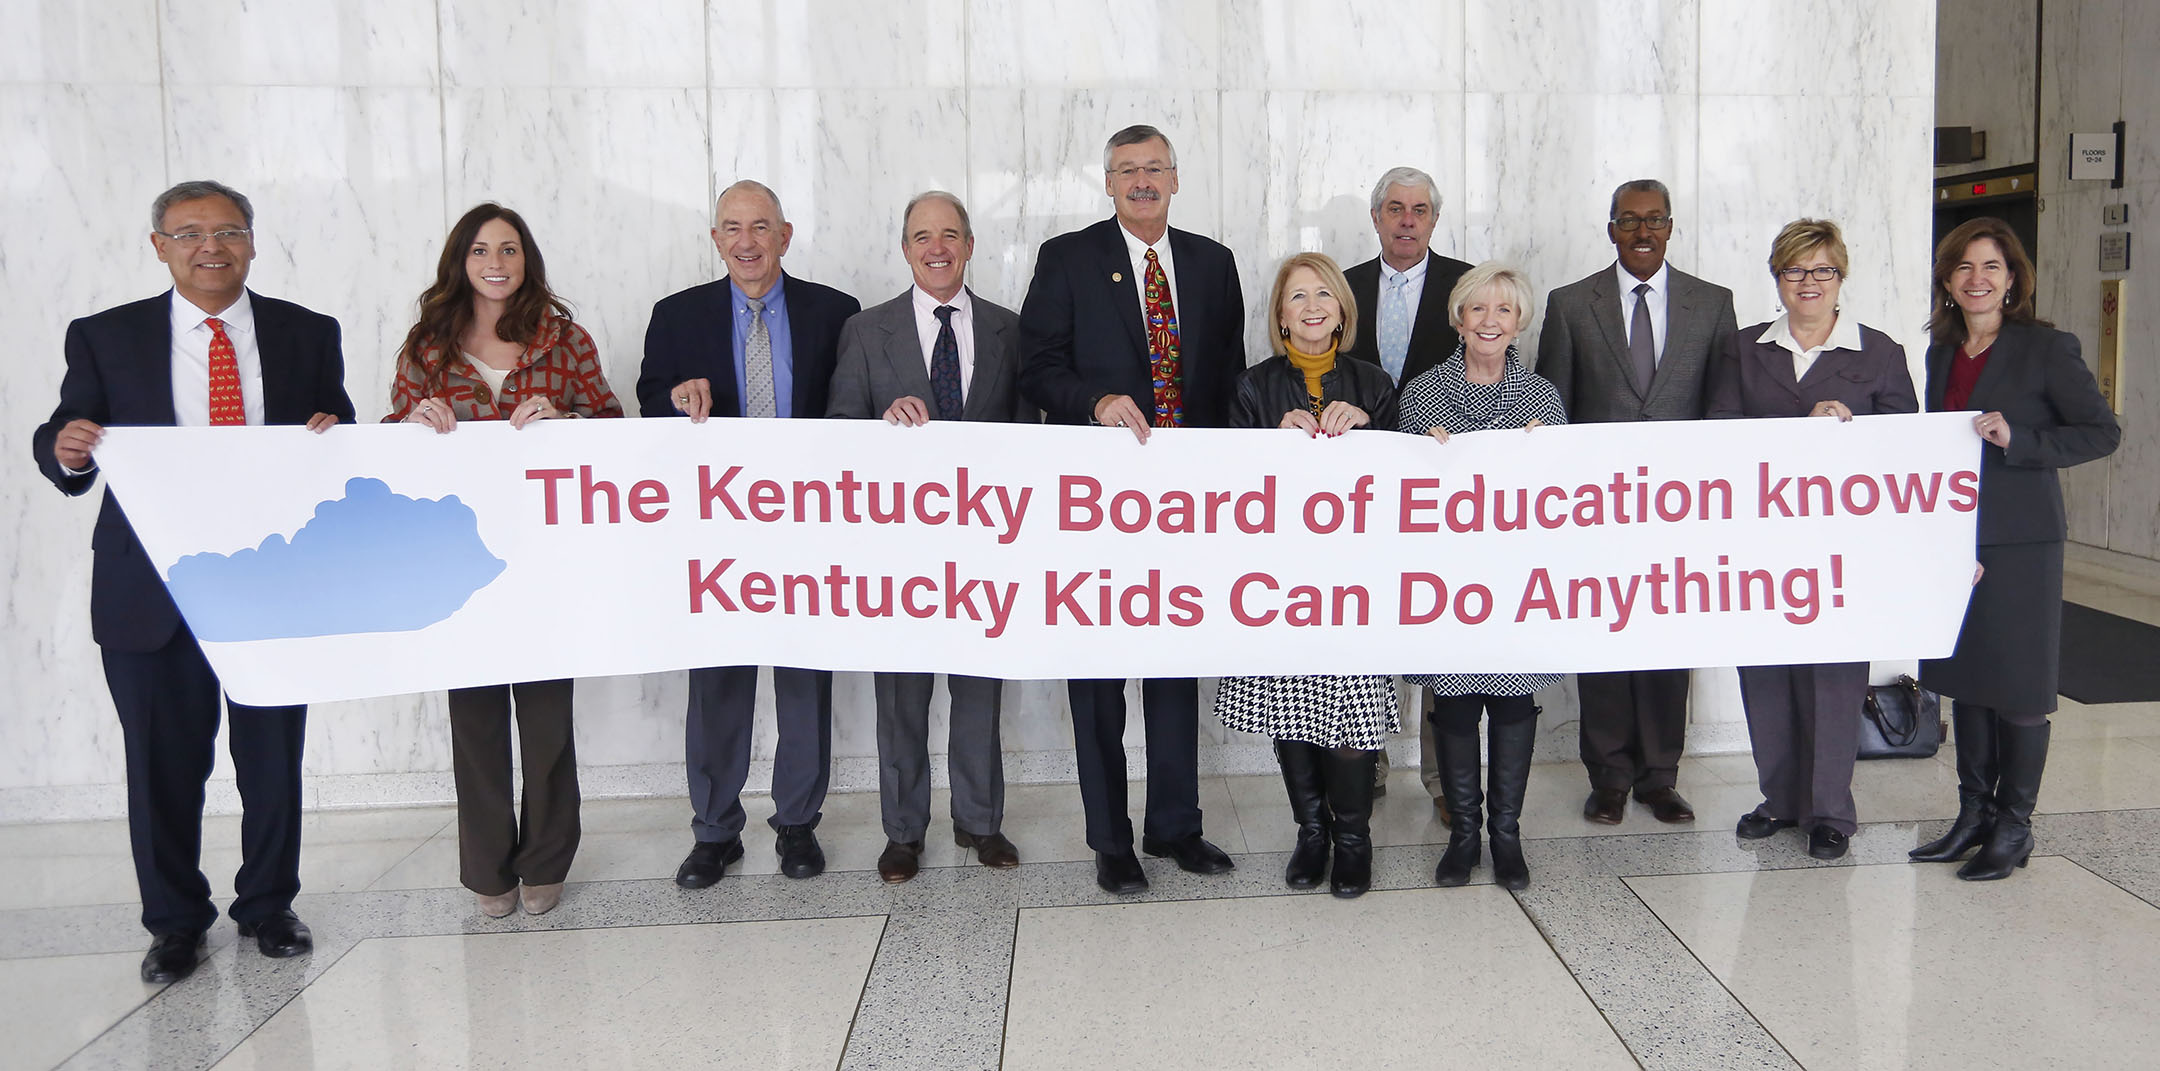 The Kentucky Board of Education participated in the "Kentucky Kids Can Do Anything" project started by Southern Middle School teacher Duane Keaton's after school film club. The club is trying to collect 1,000 pictures of people holding a sign that reads "Kentucky Kids Can Do Anything."